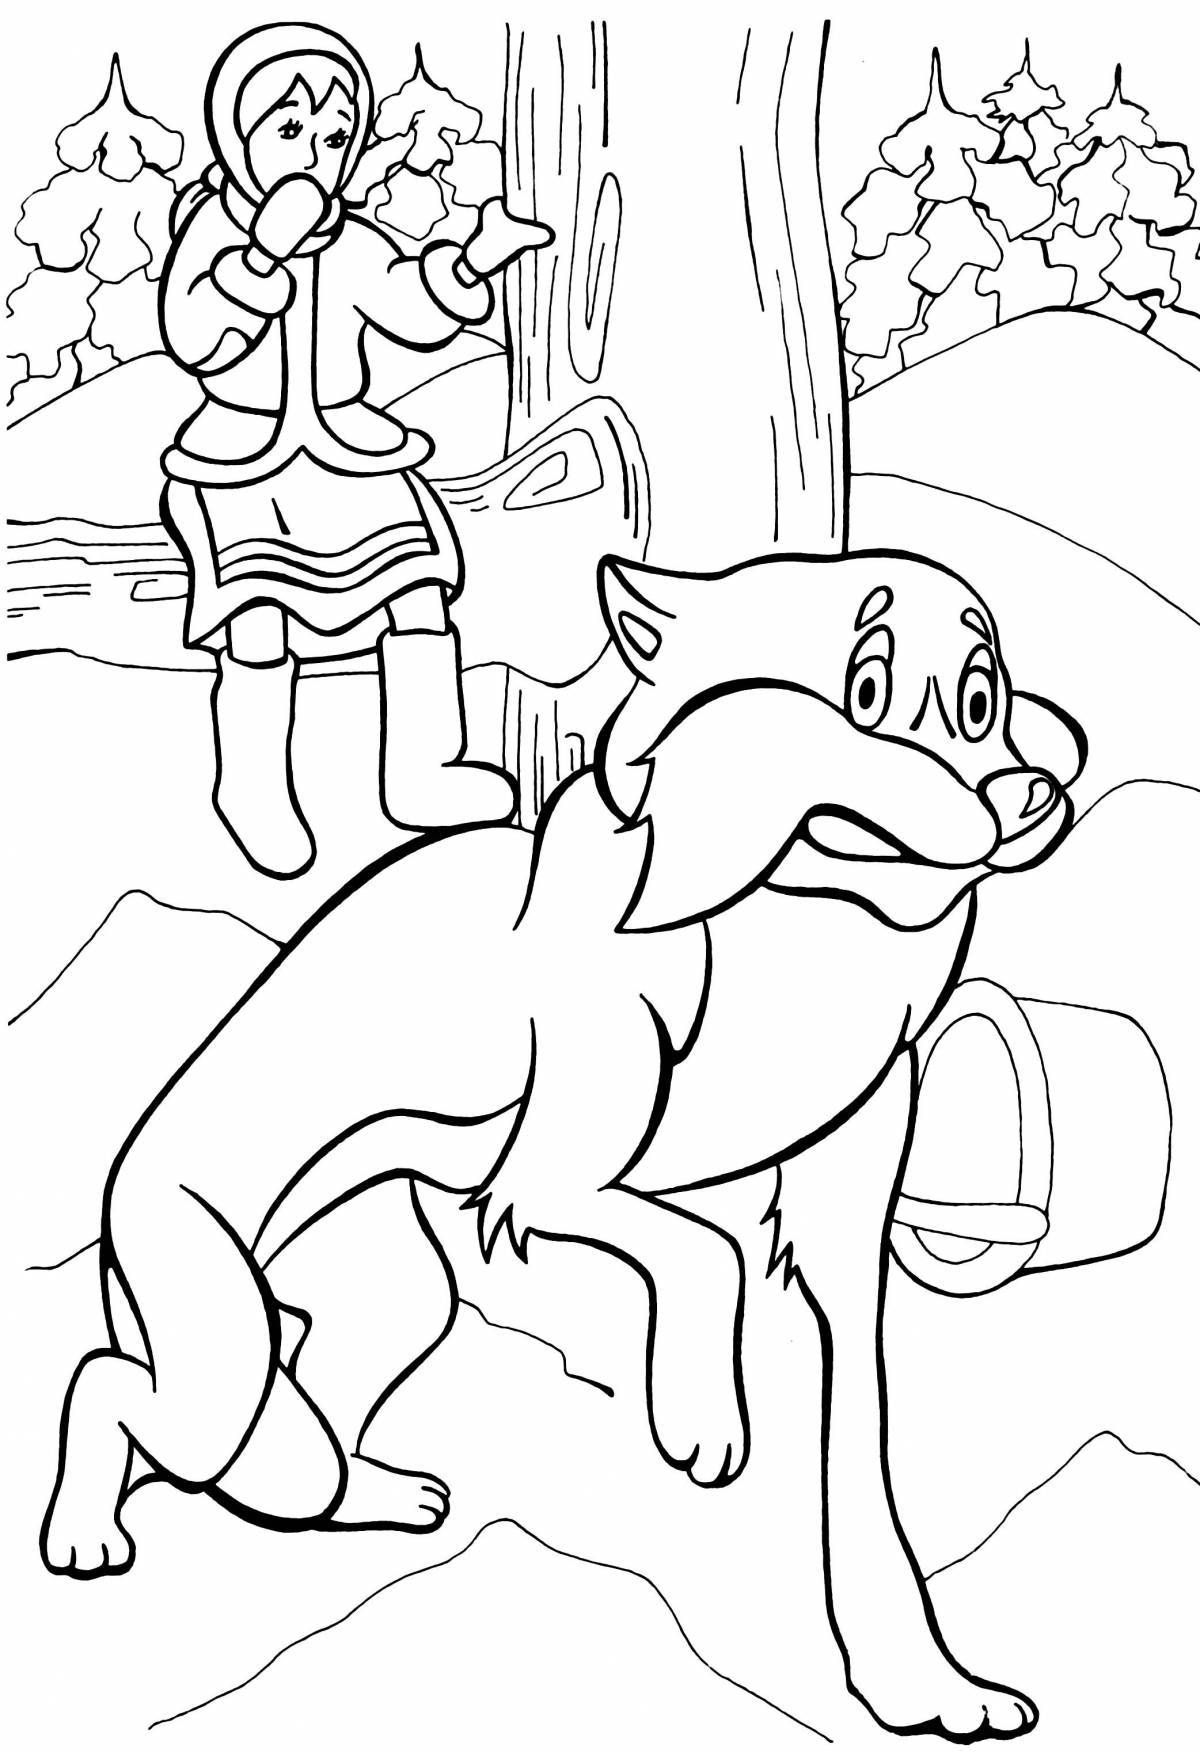 Blessed 12 months coloring page